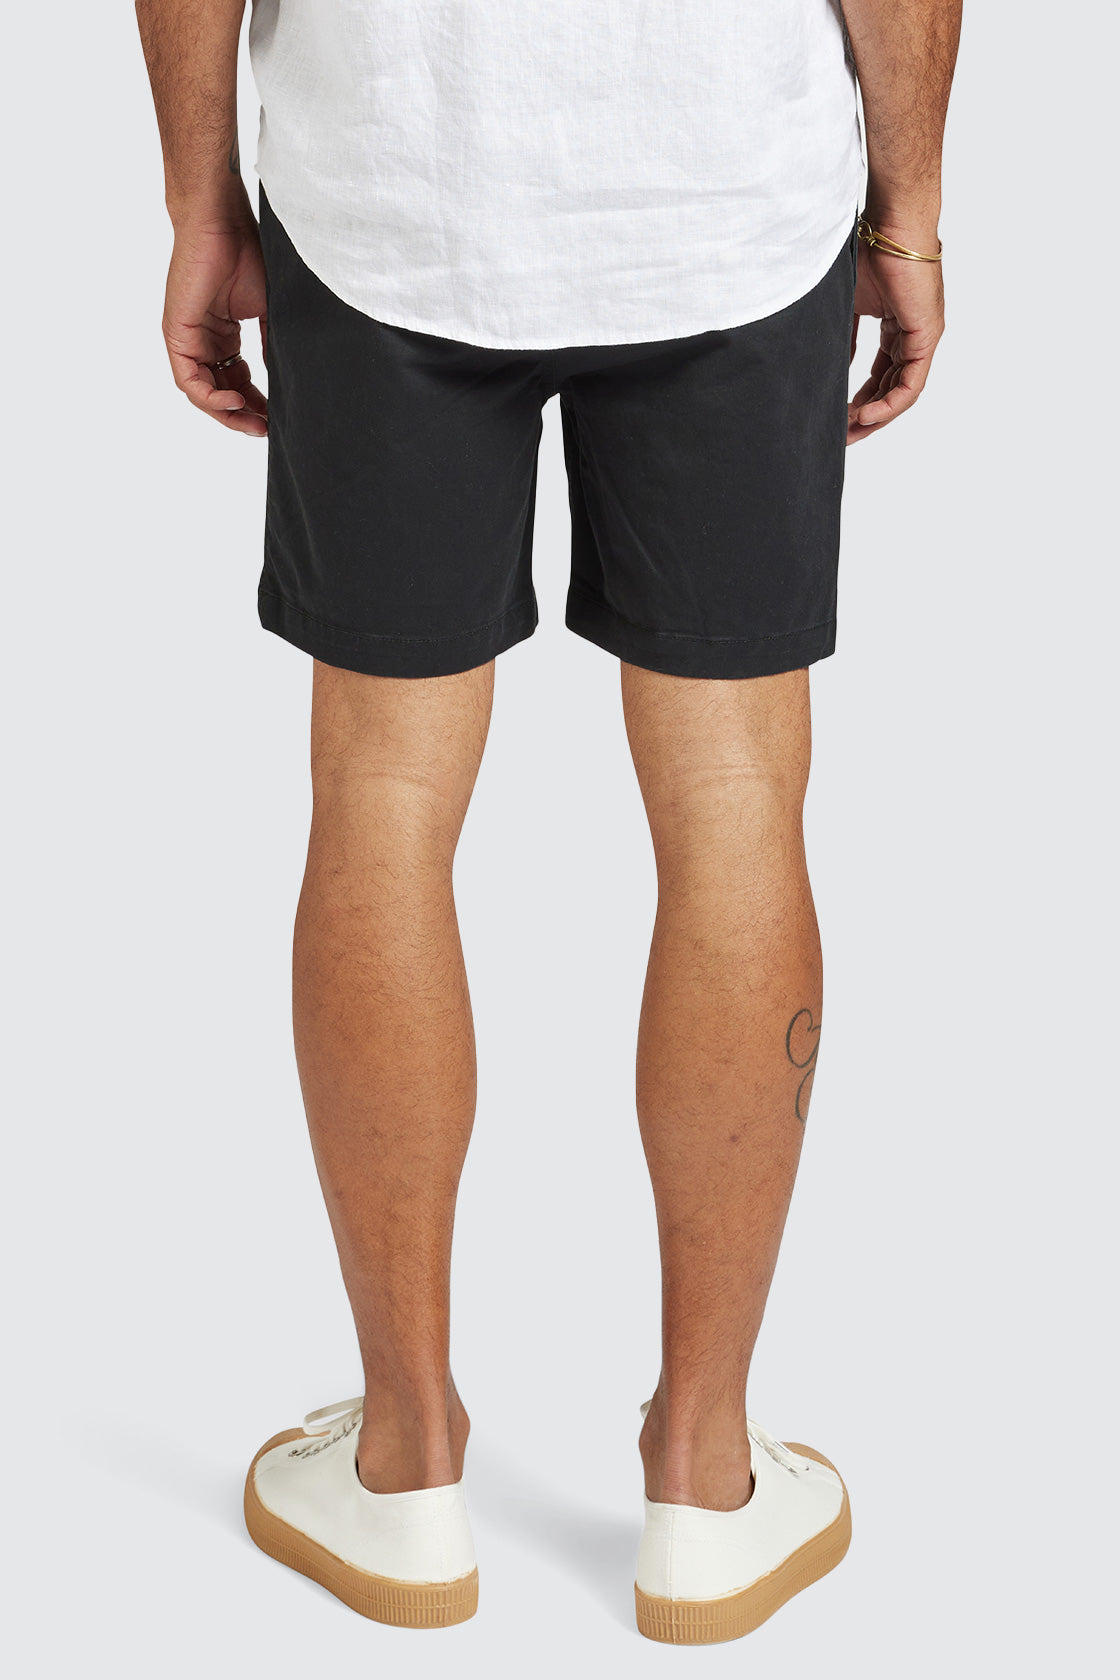 The Academy Brand Volley Short Black